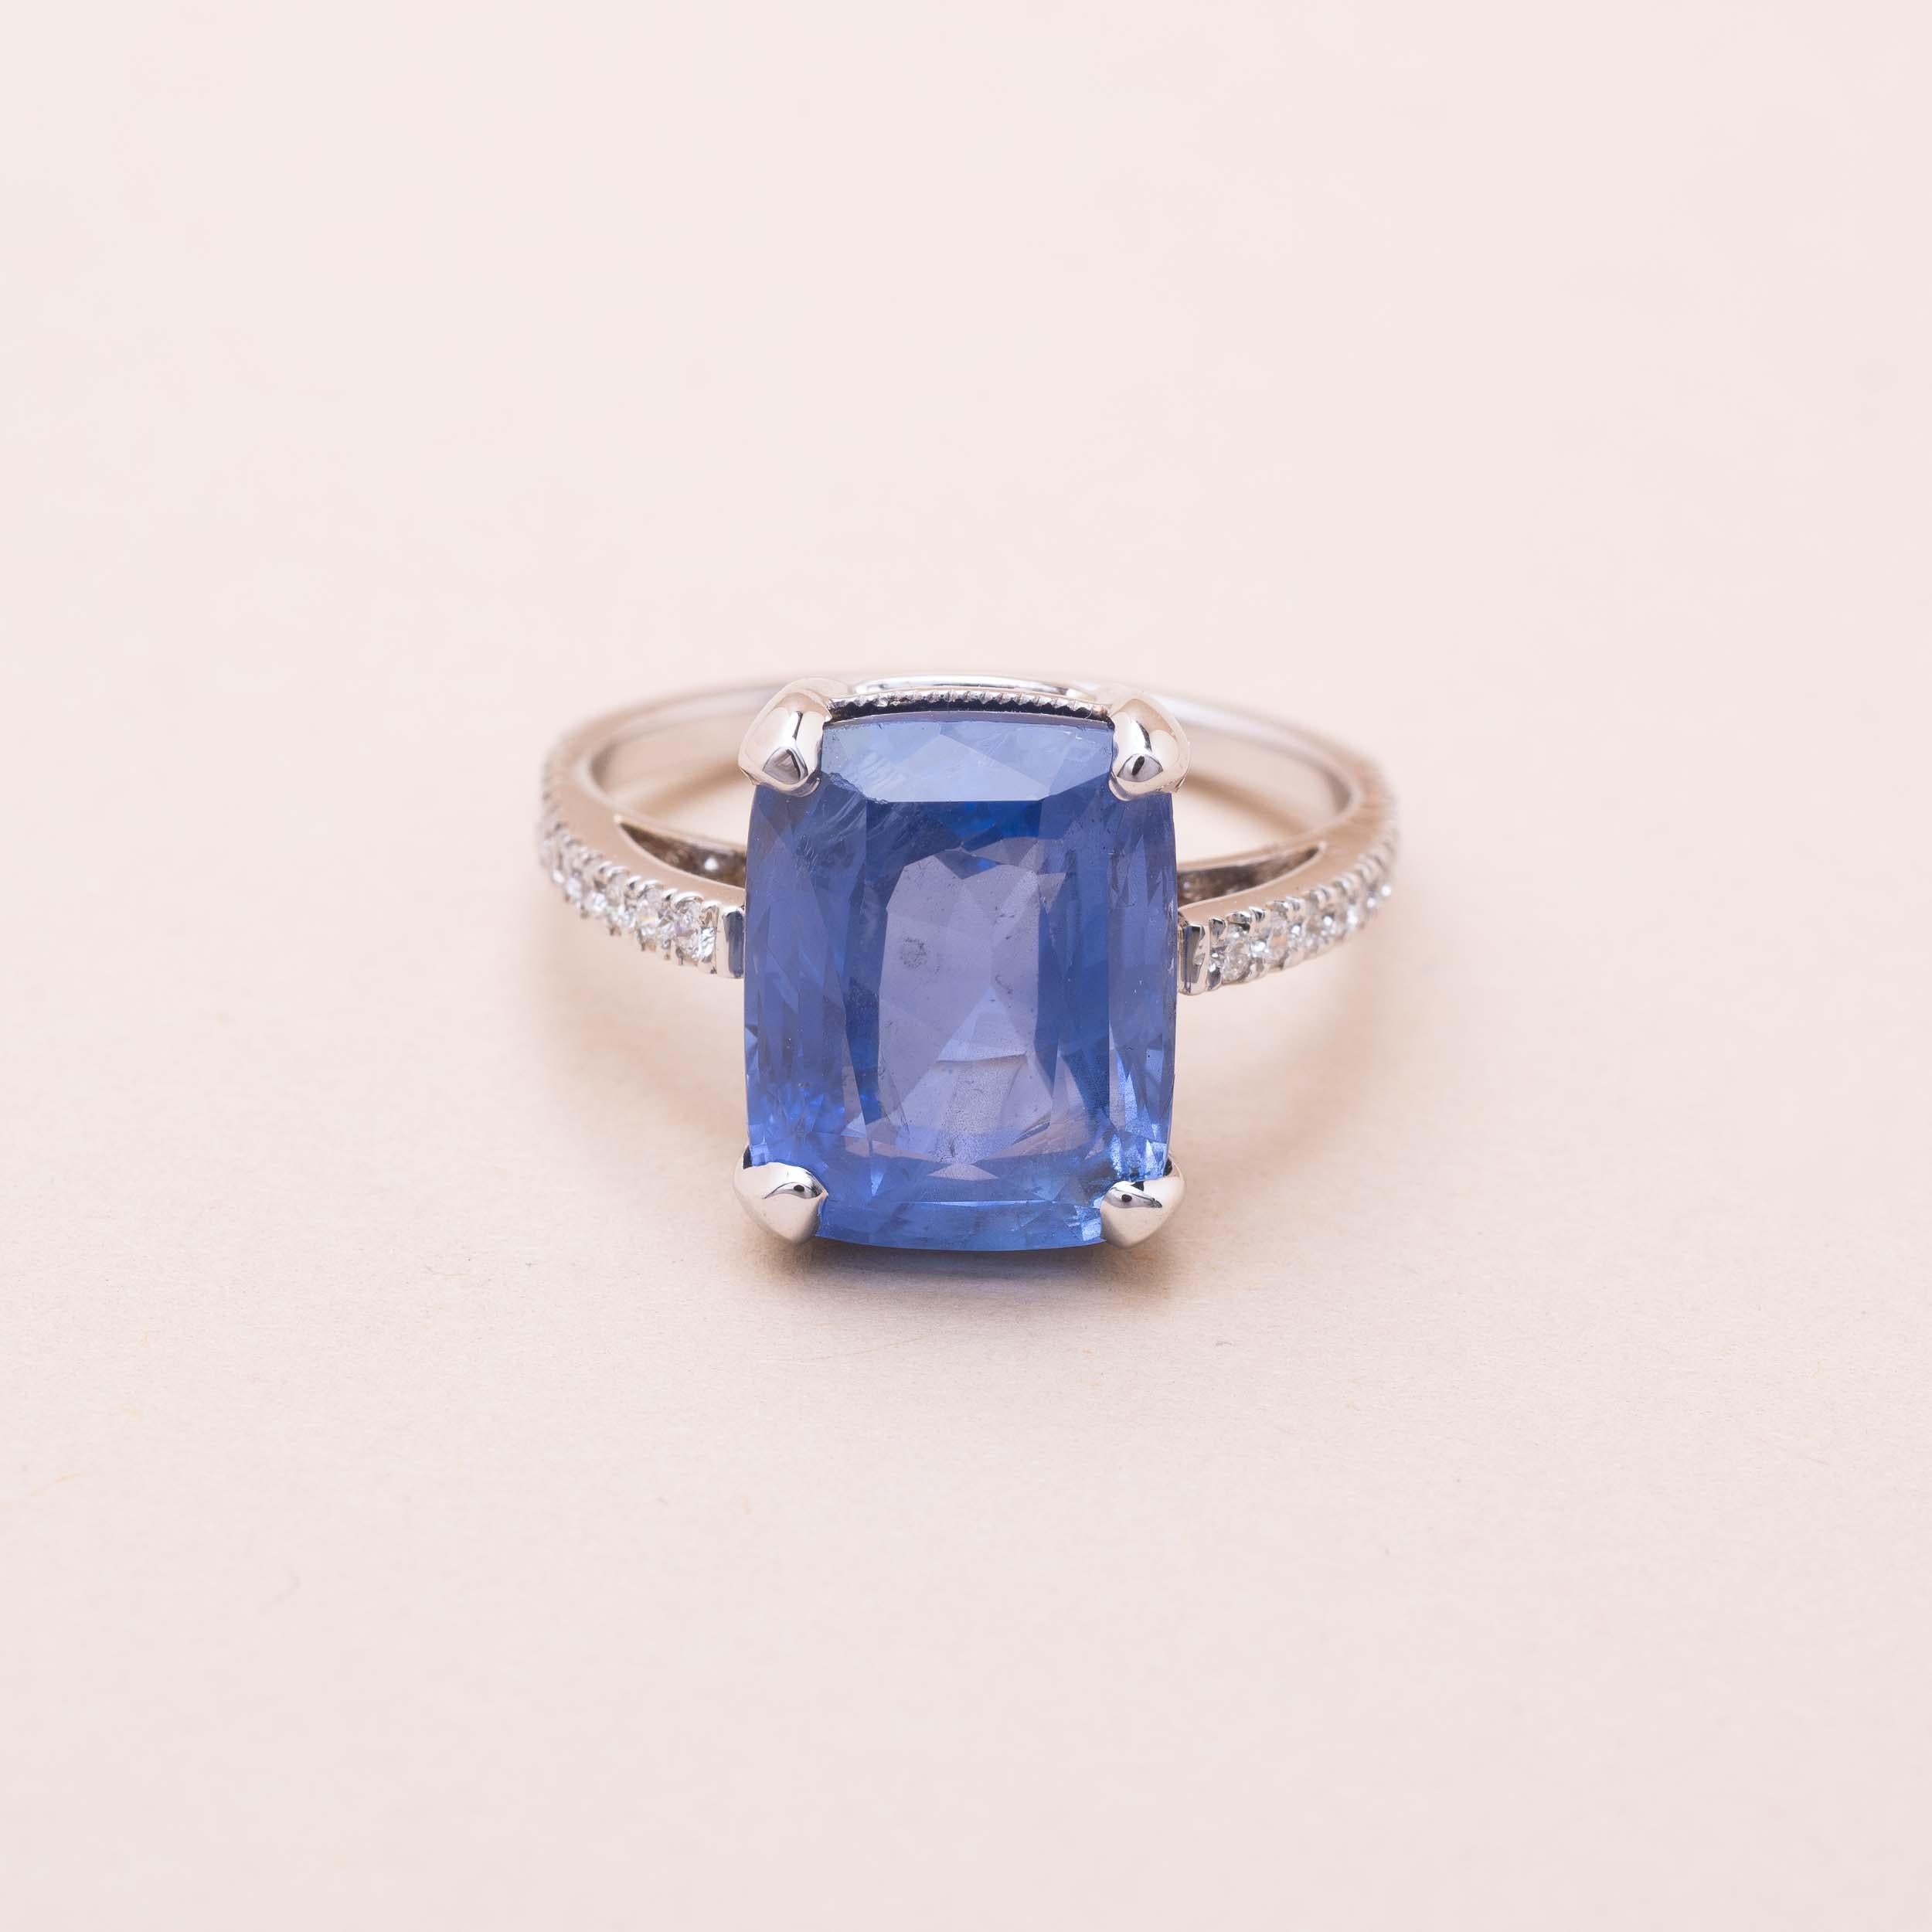 18K white gold 8.12 carats emerald-cut sapphire

Unheated Ceylan deep blue sapphire 

The band is set with 24 brillant-cut diamonds weighting 0.48 carat total 

Ring size : 54.5 FR / 7-7.5 US

Gross weight : 5.51g 

Delivered with a GEM certificate